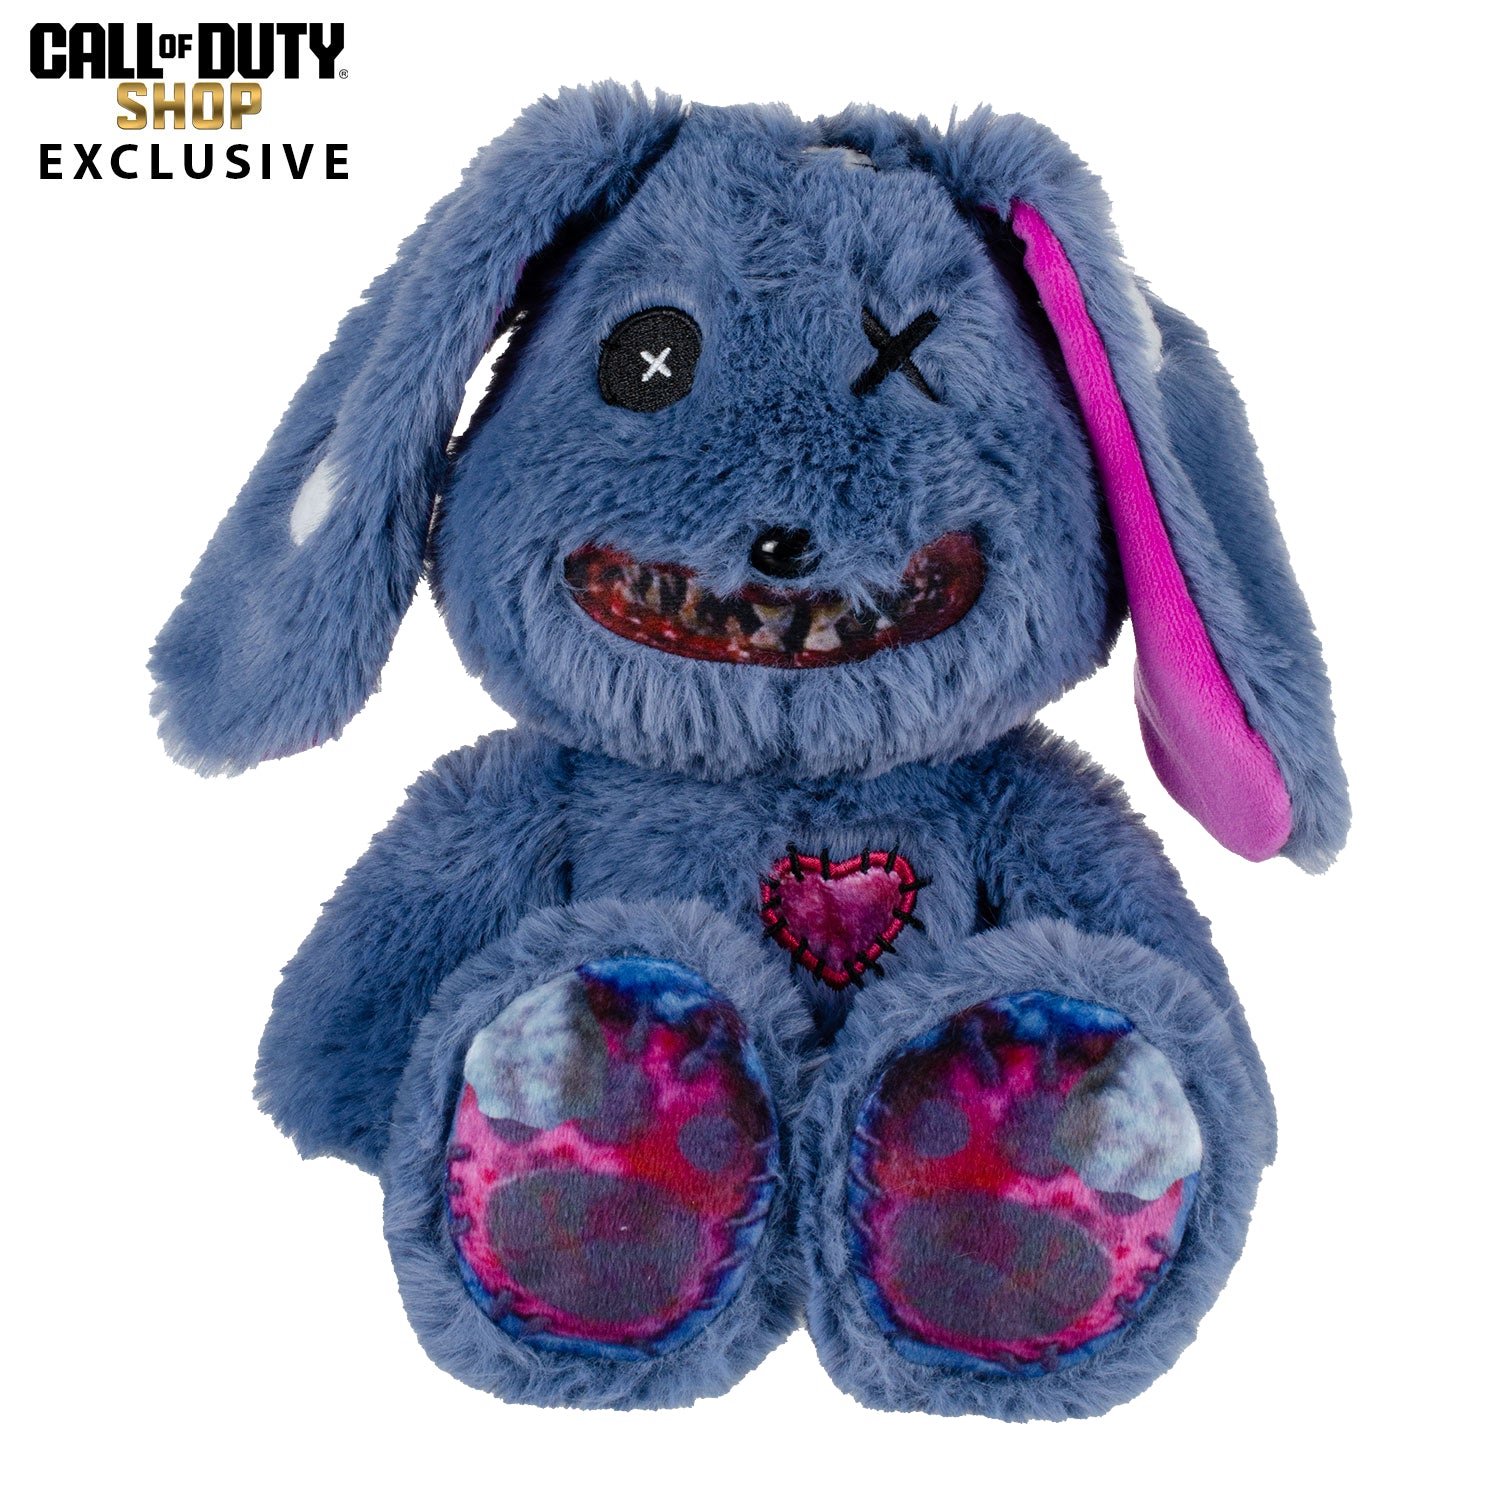 Call of Duty Mister Peeks Plush Toy - Call of Duty Store